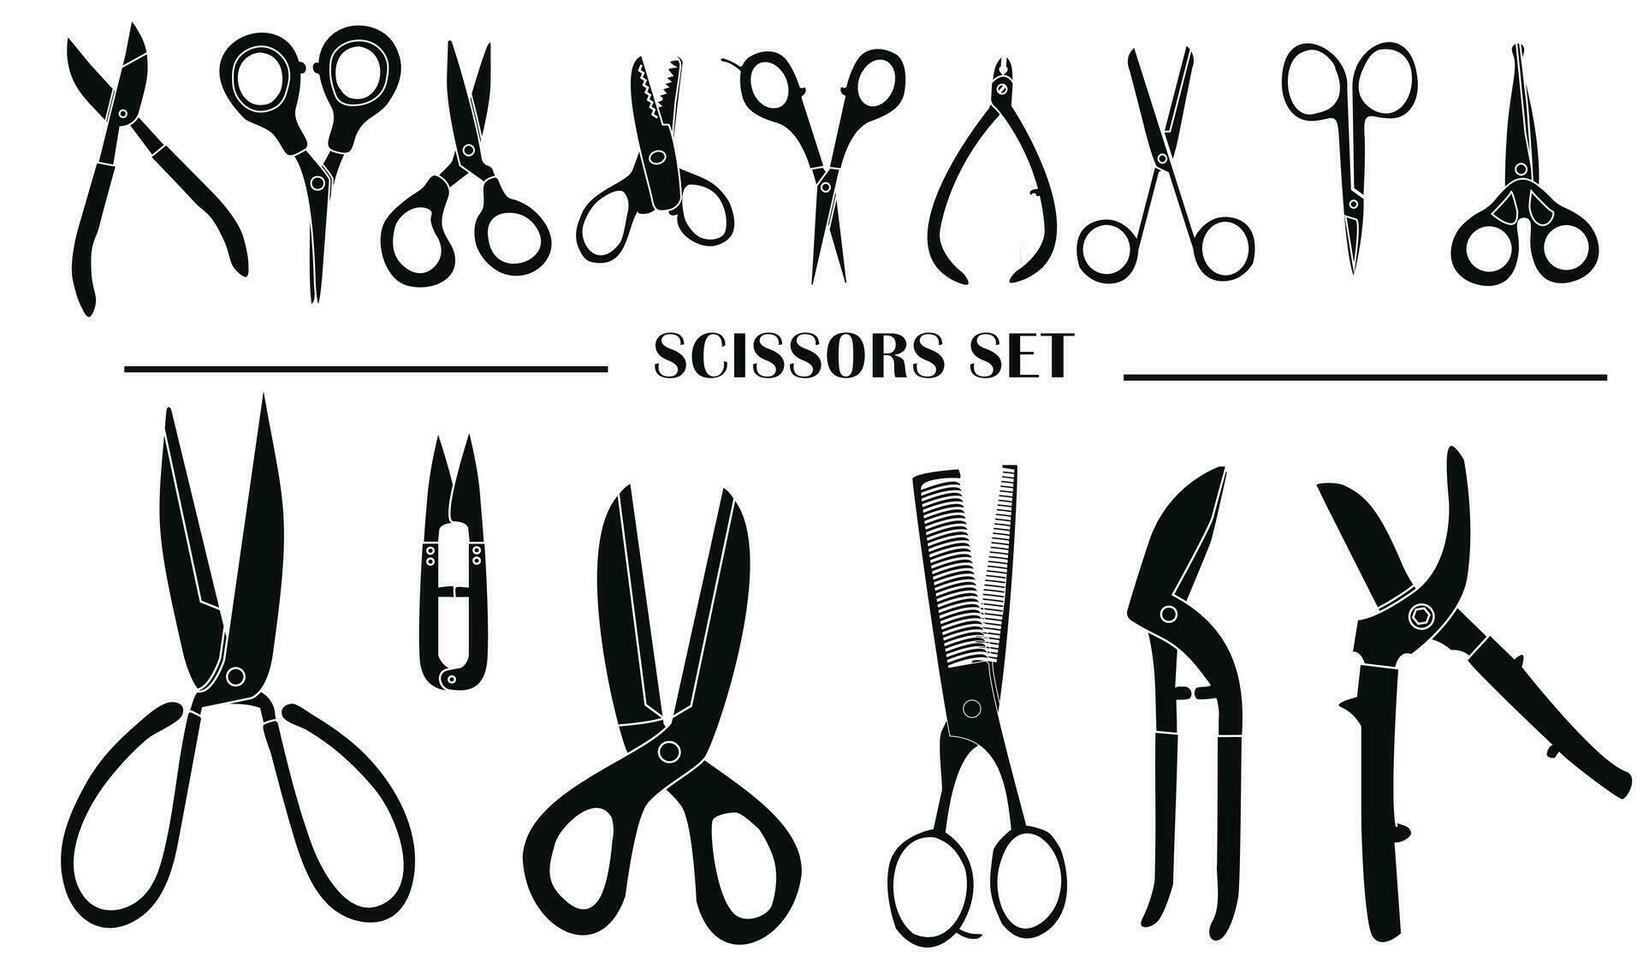 Different scissors types vector illustration in silhouette style. Black Scissor vector set icon on white background. Open, closed cutting scissors or nippers collection.